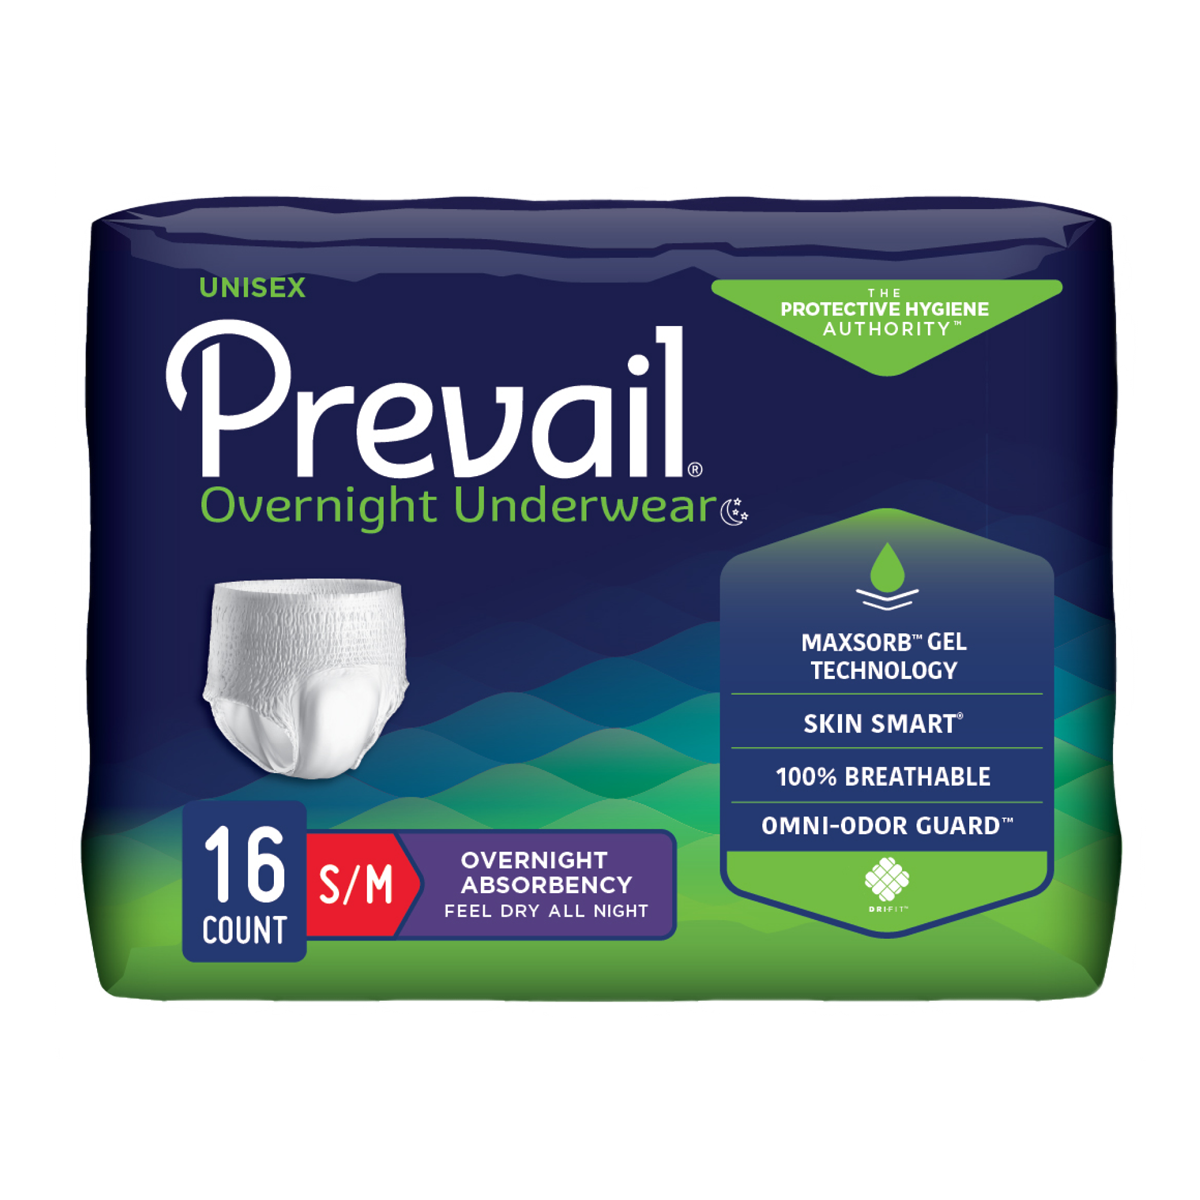 Prevail incontinence underwear for men and women